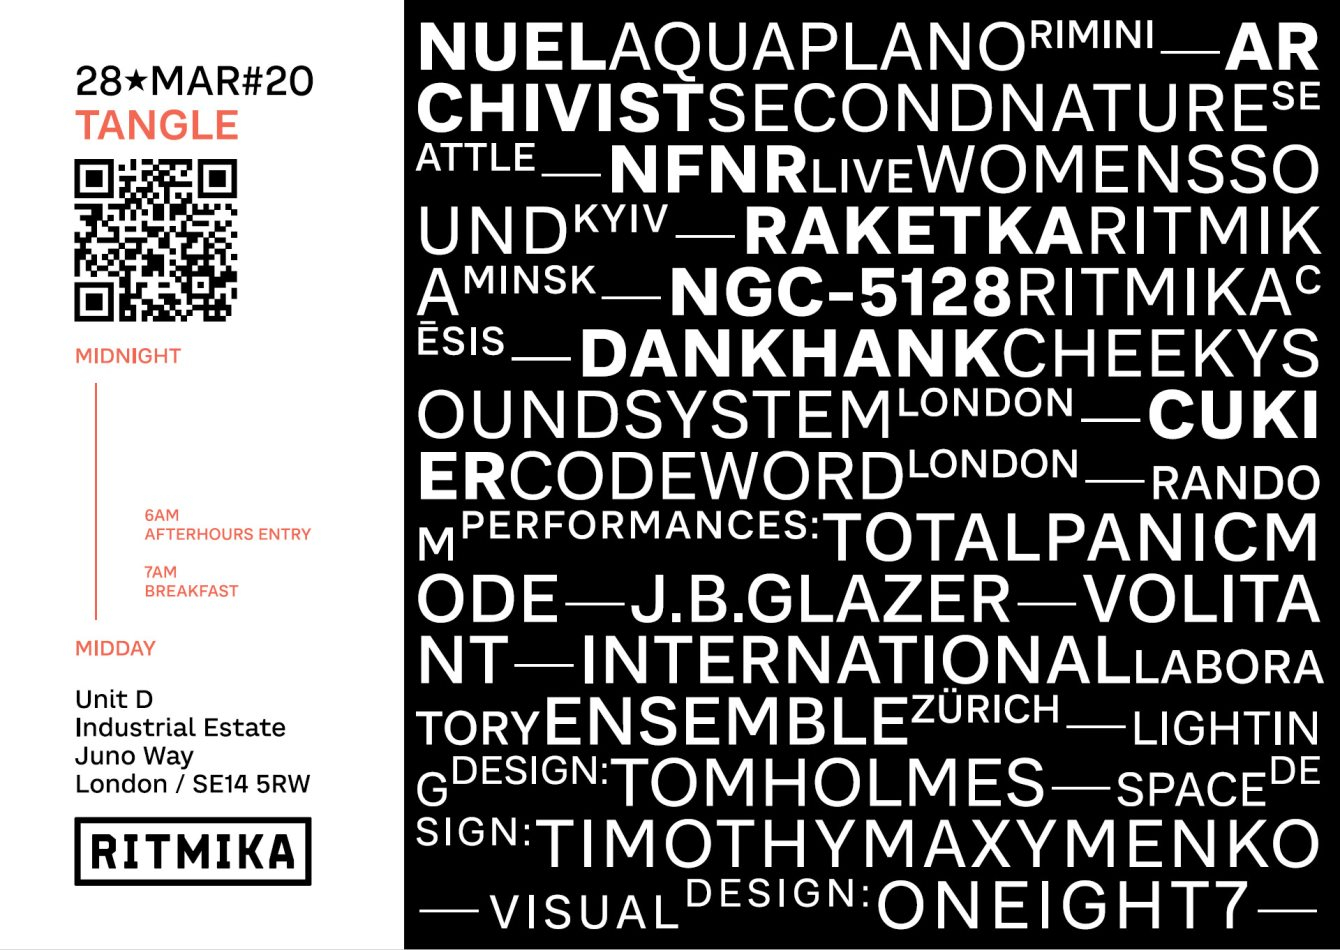 [CANCELLED] Tangle with Nuel, Archivist, Nfnr, Raketka - Flyer front